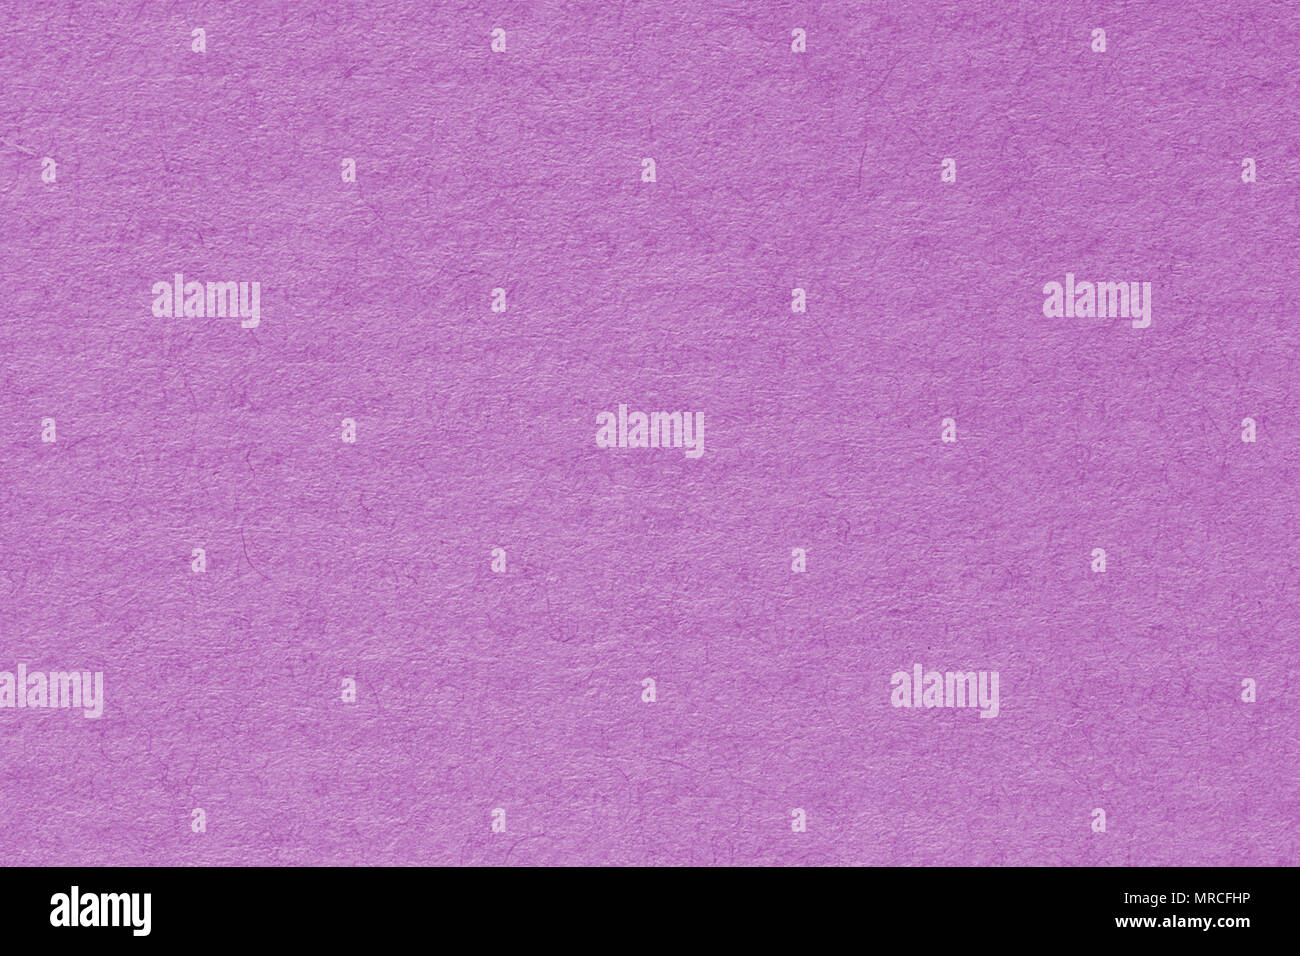 Plain Bright Pink Wallpaper - Thick Textured Feature - Paste The